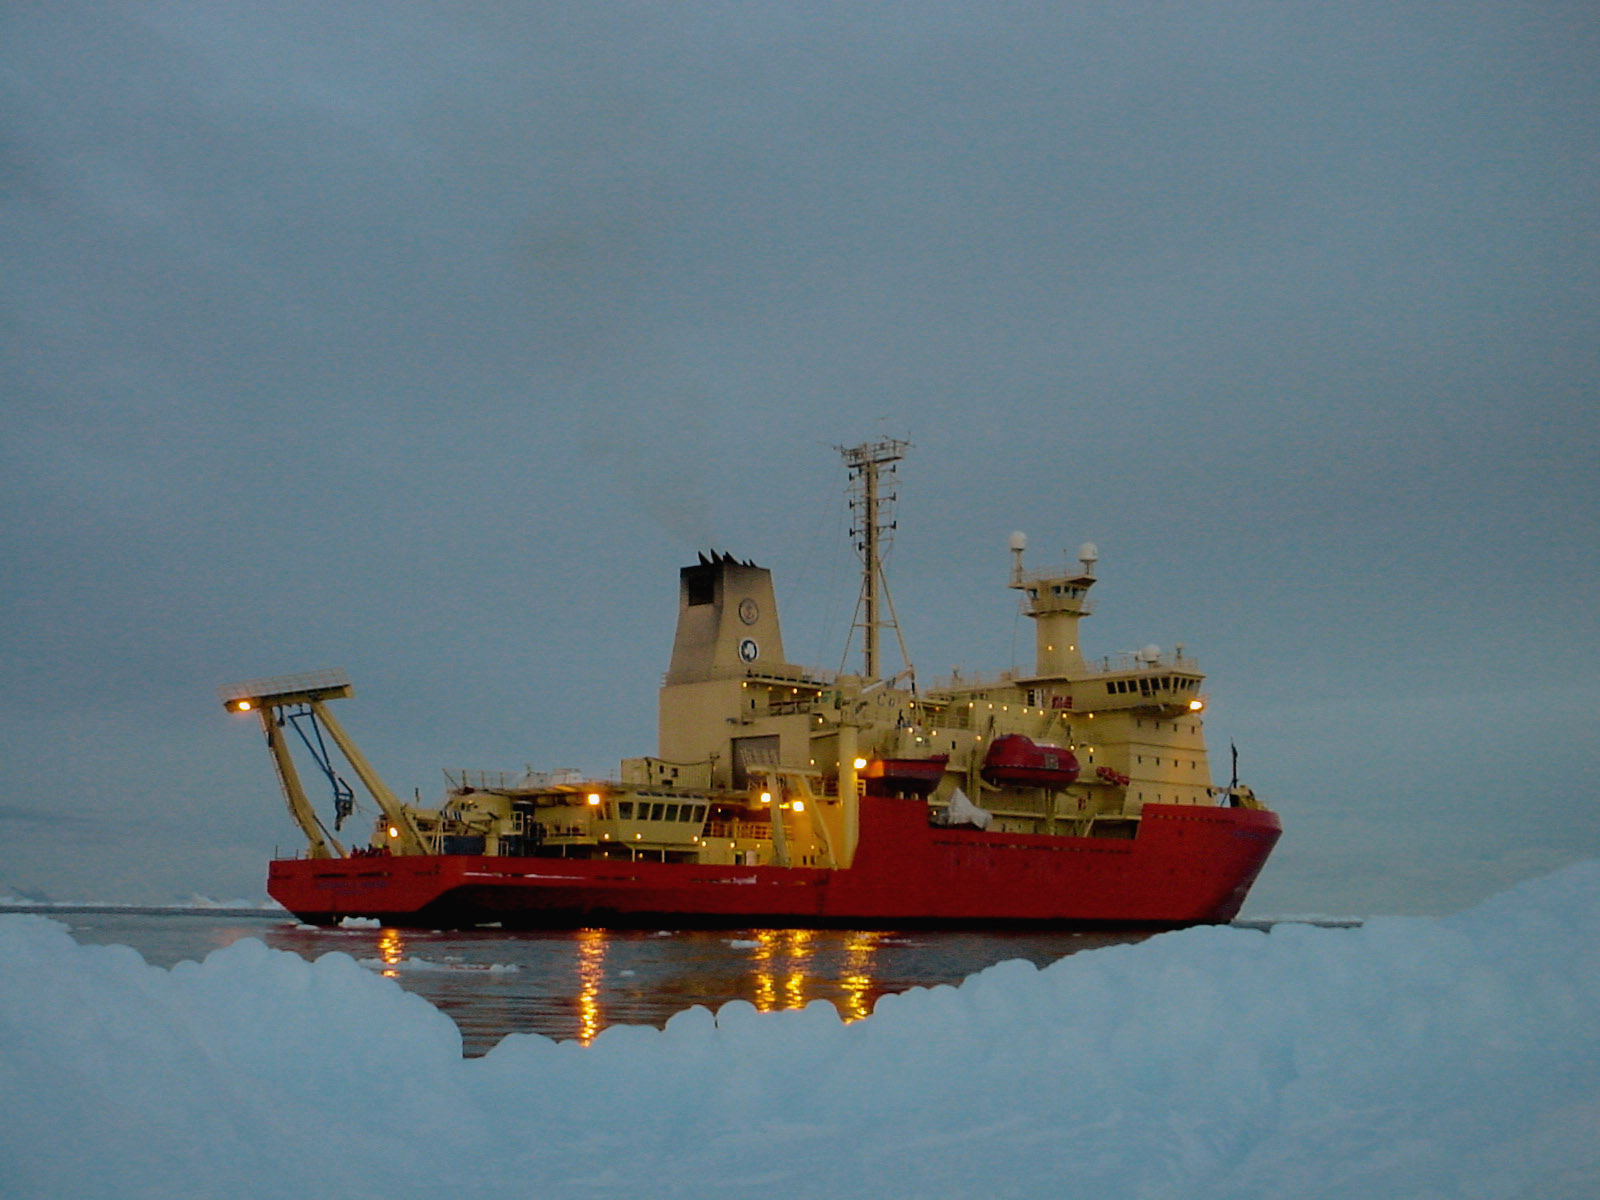 A ship sits in the water near a snow covered embankment.